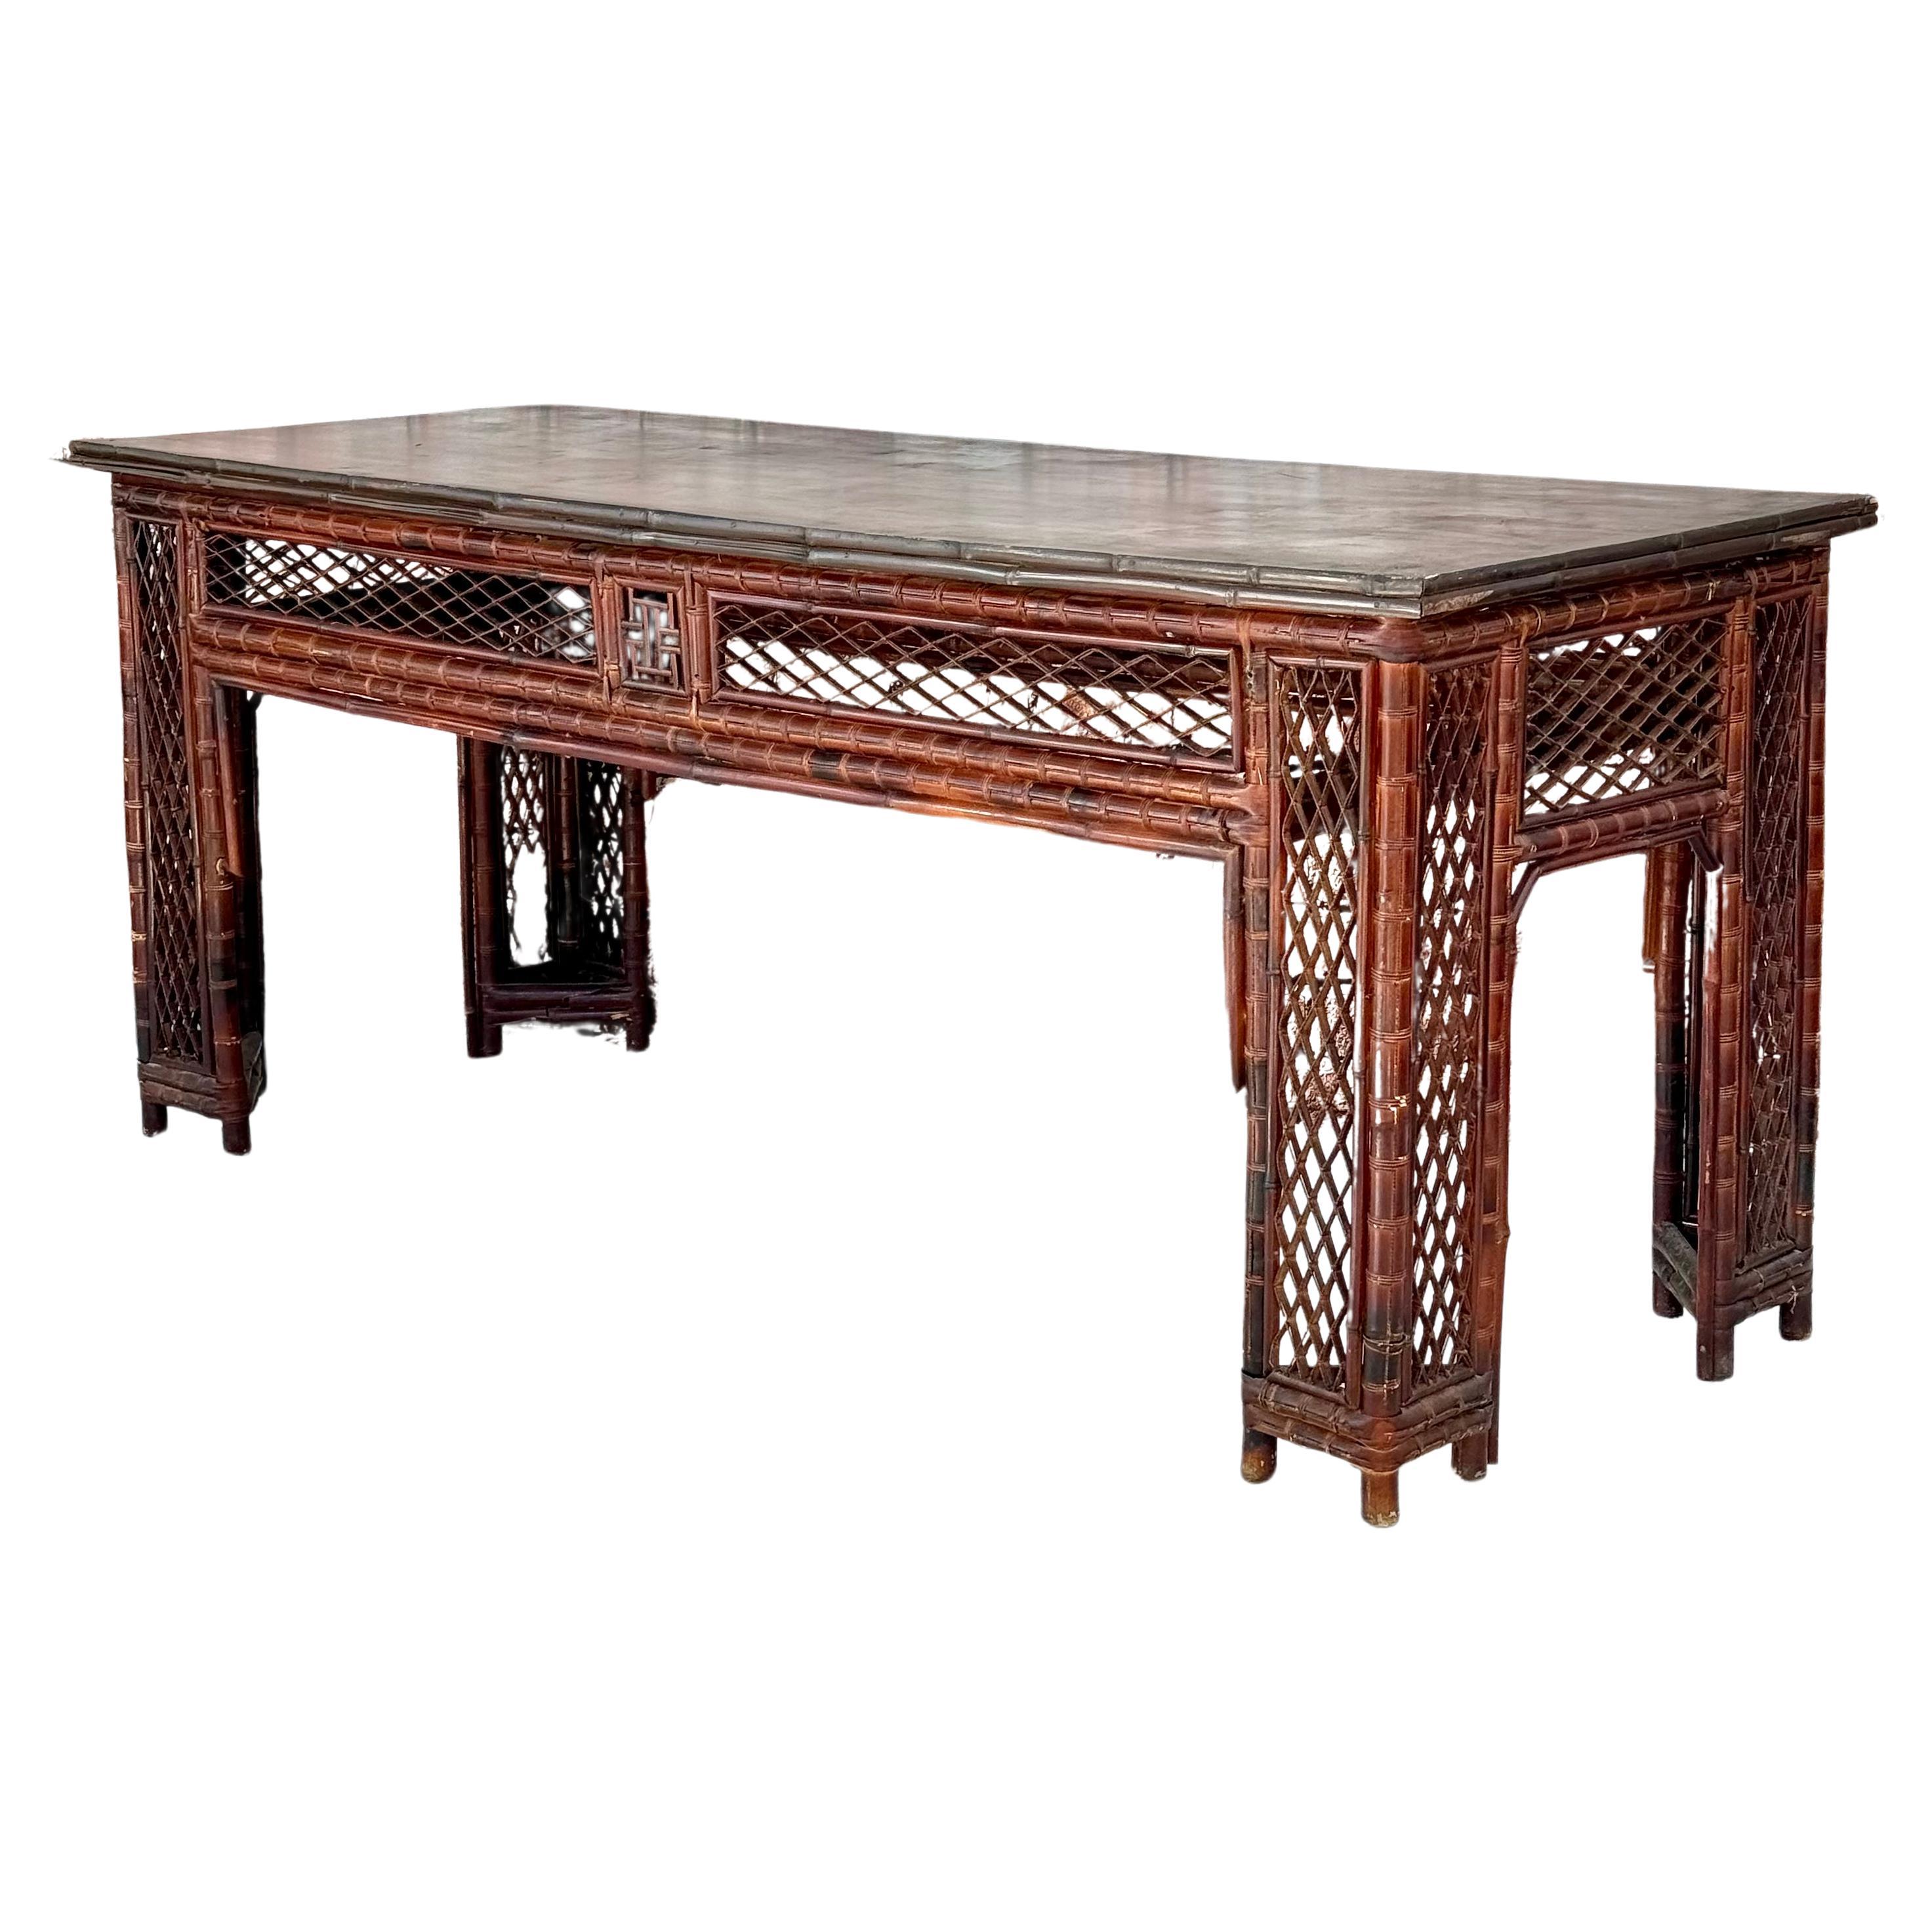  Chinese Export Bamboo Fretwork Library Table